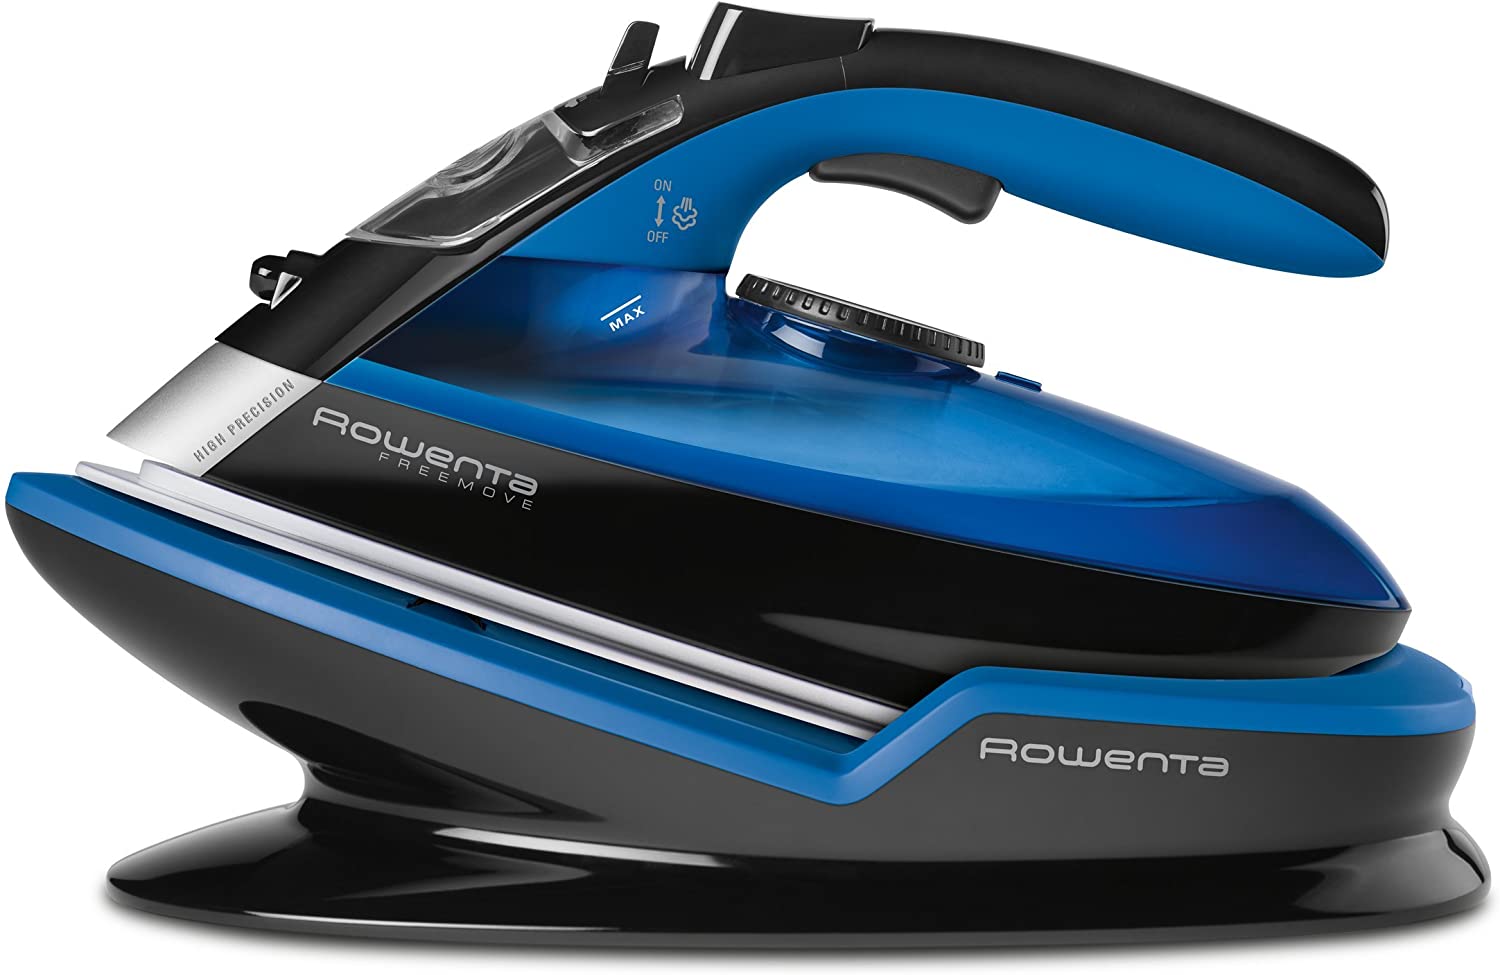 1500w steam iron. #review. #freemove. 